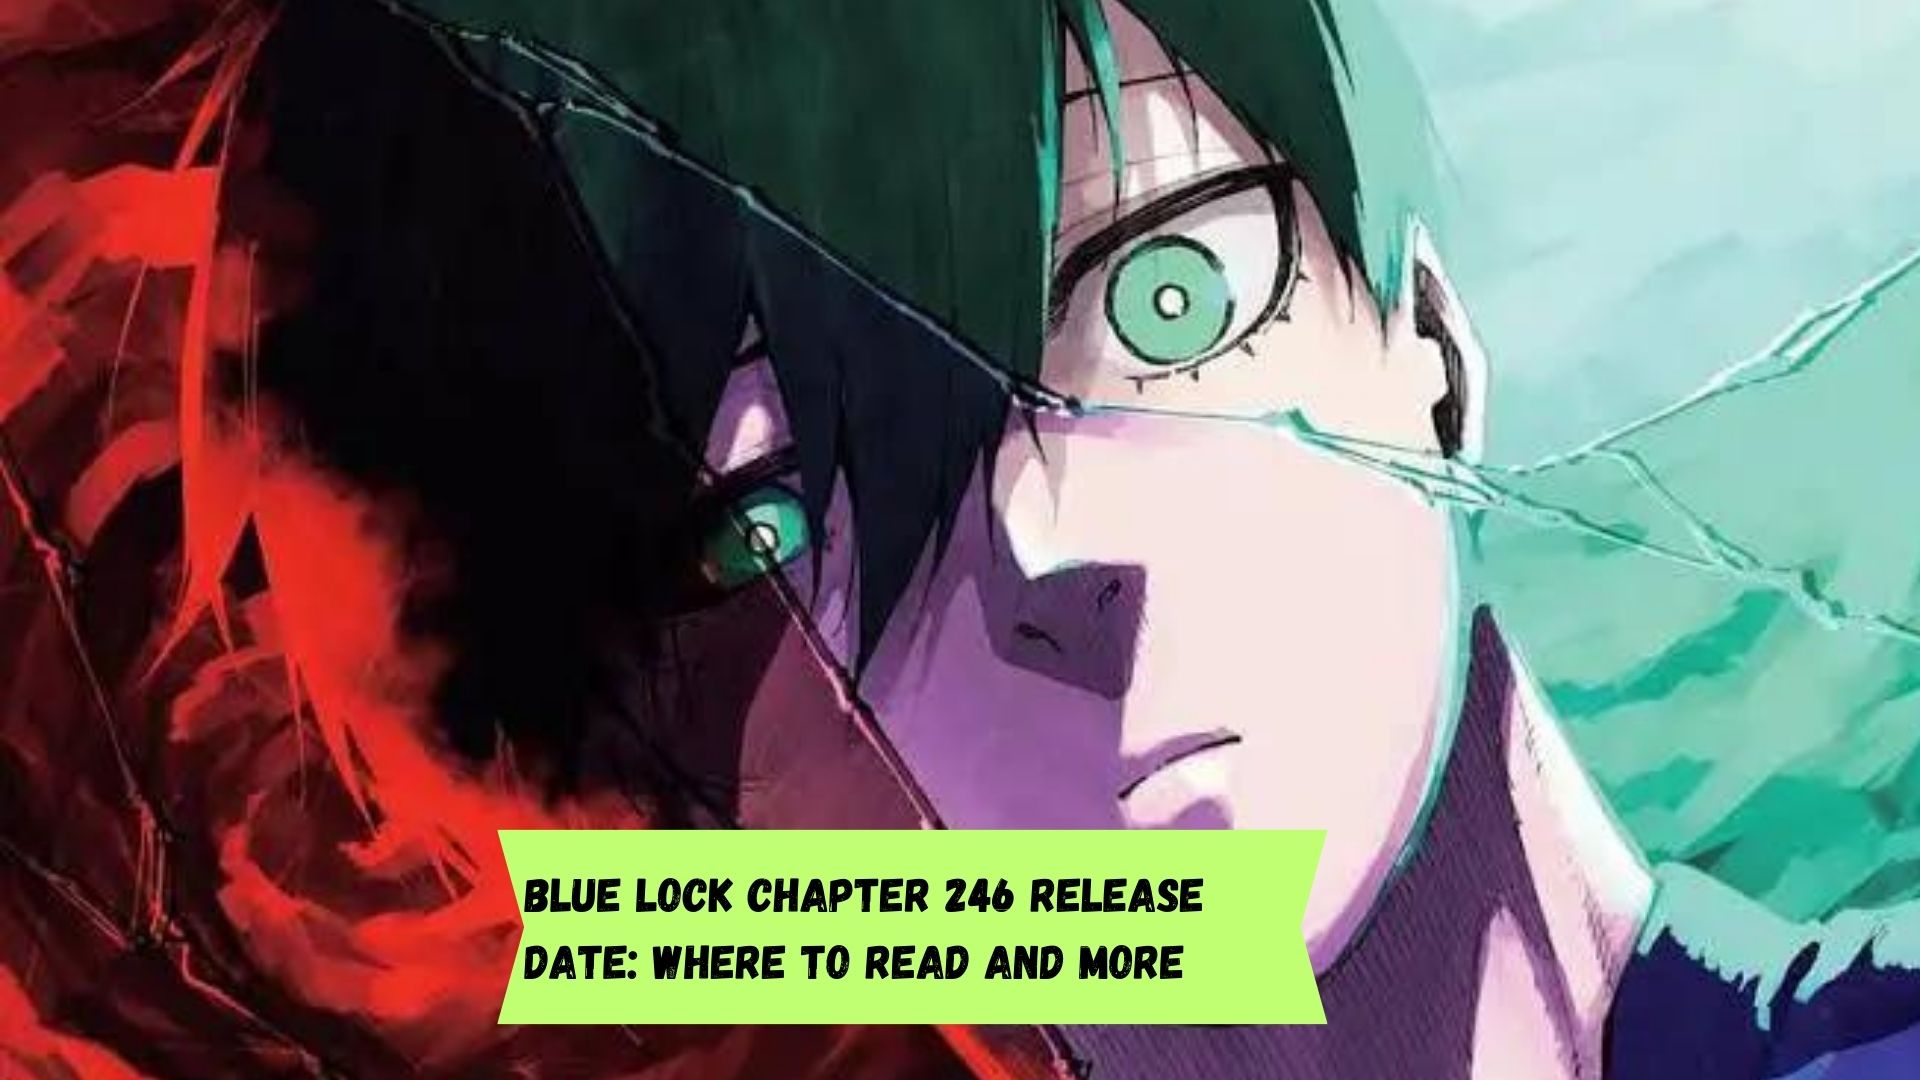 Blue Lock Chapter 246 Release date: Where to read and more